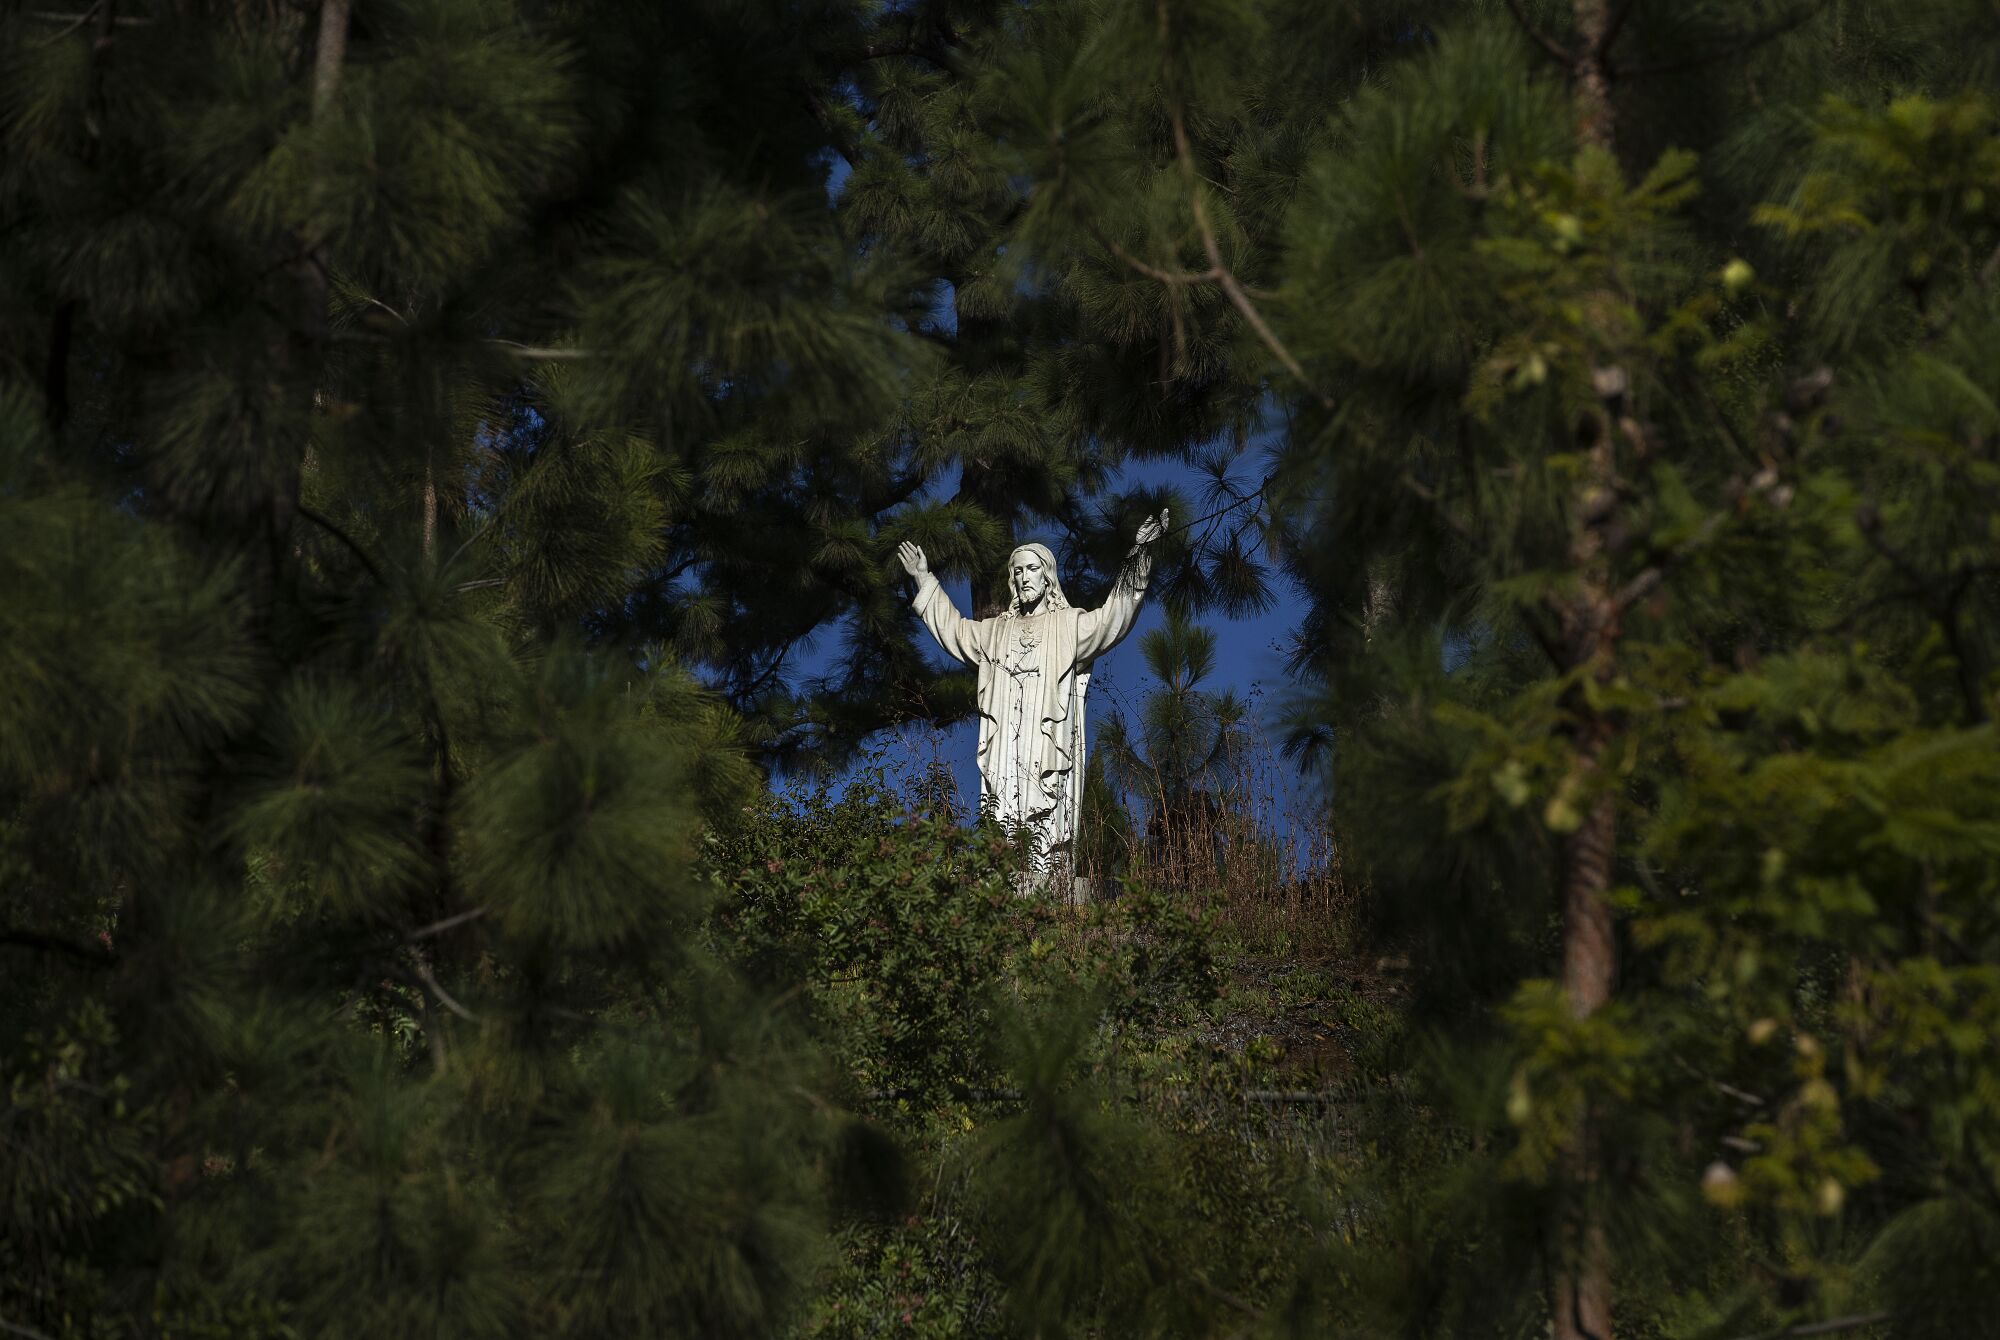 A statue of Jesus on the grounds of the Monastery of the Angels.